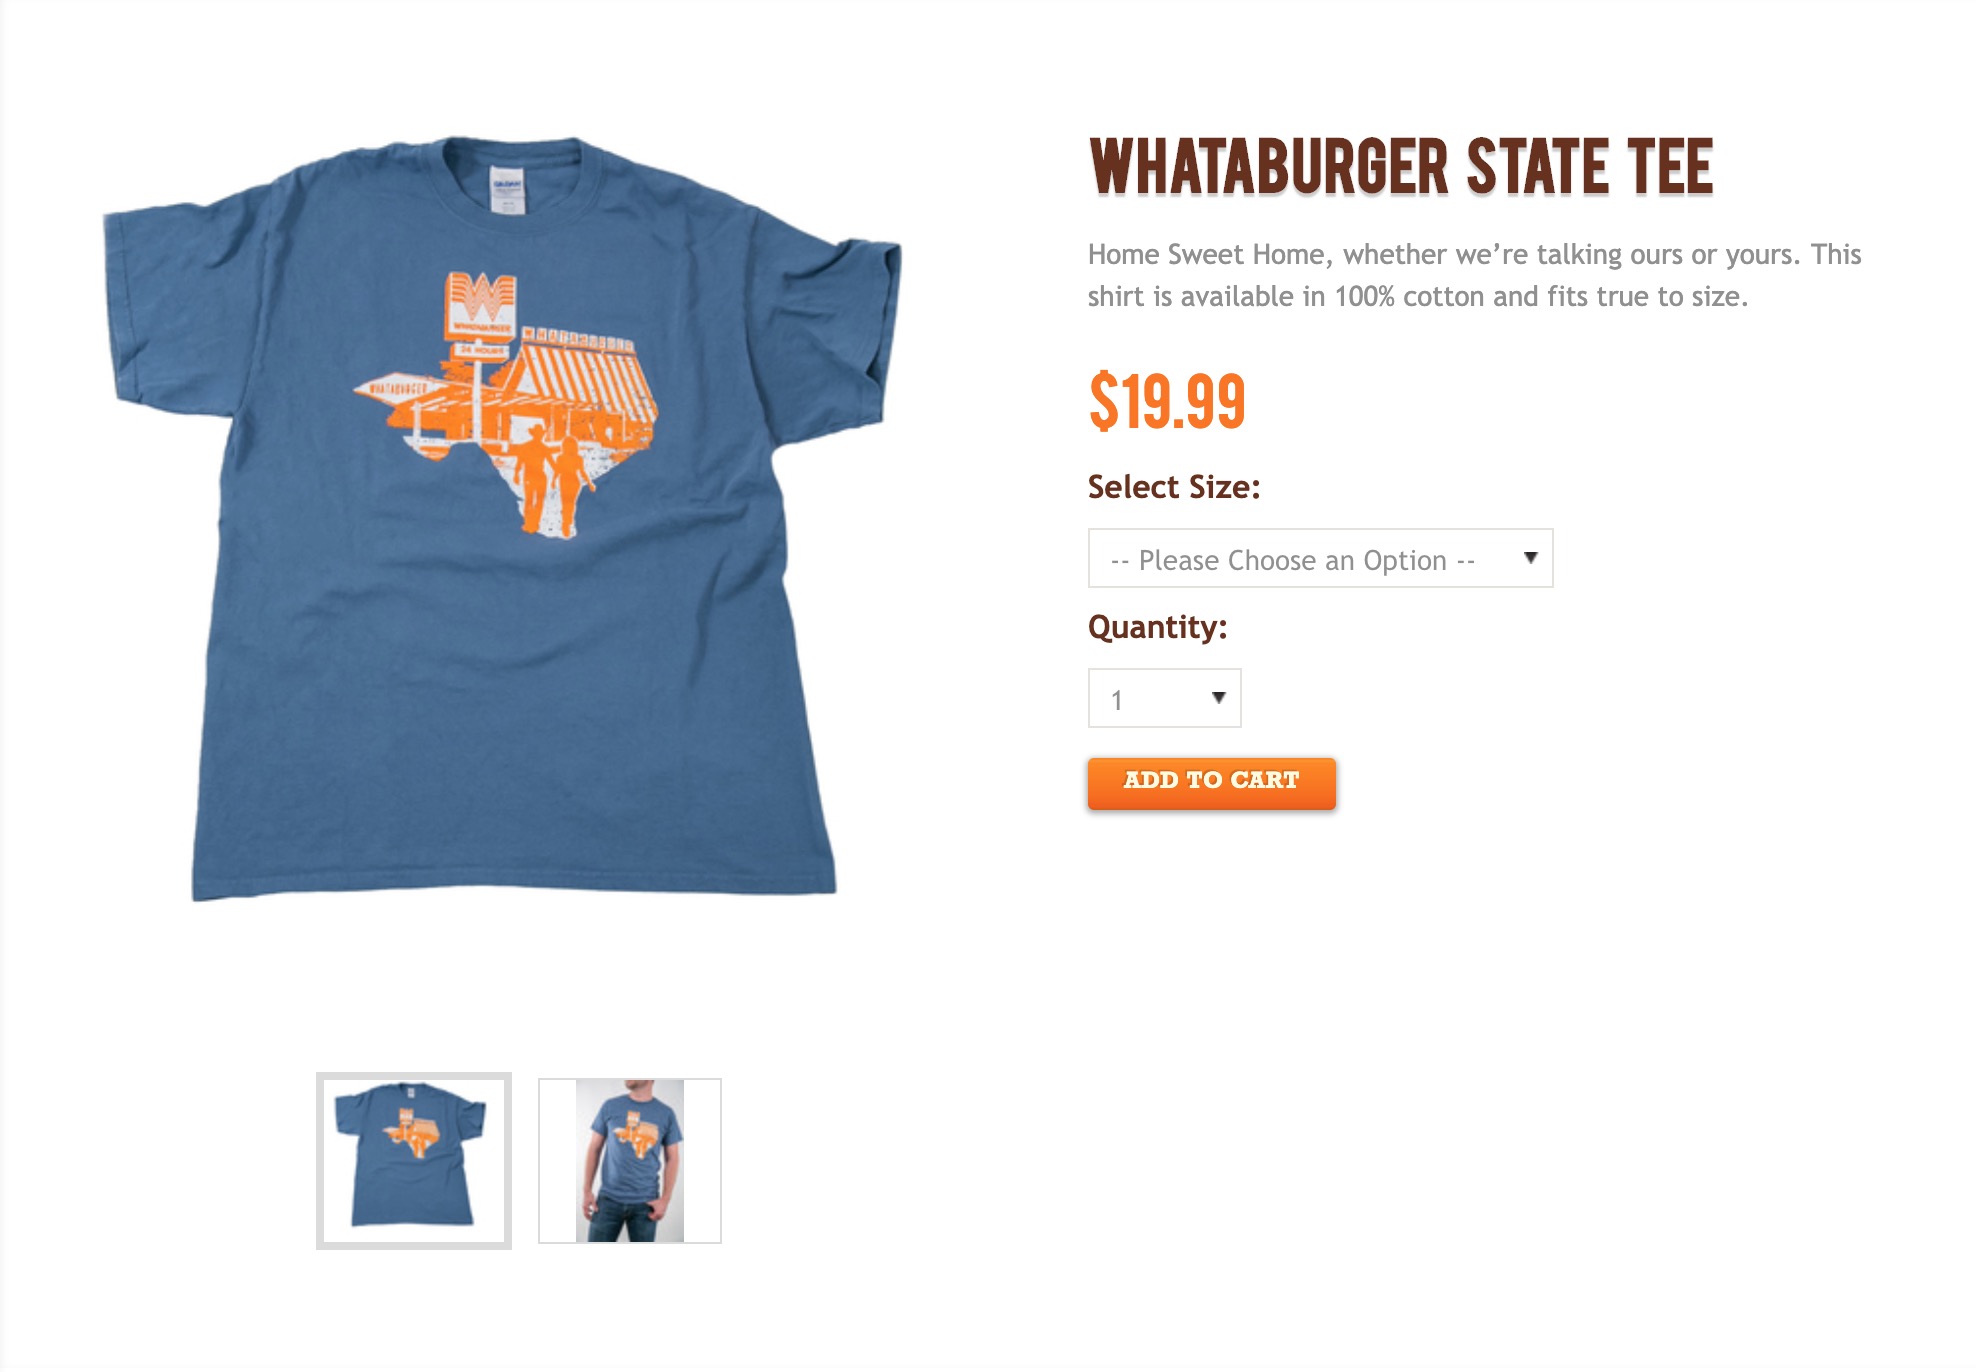 Whataburger swag for dad for under $20